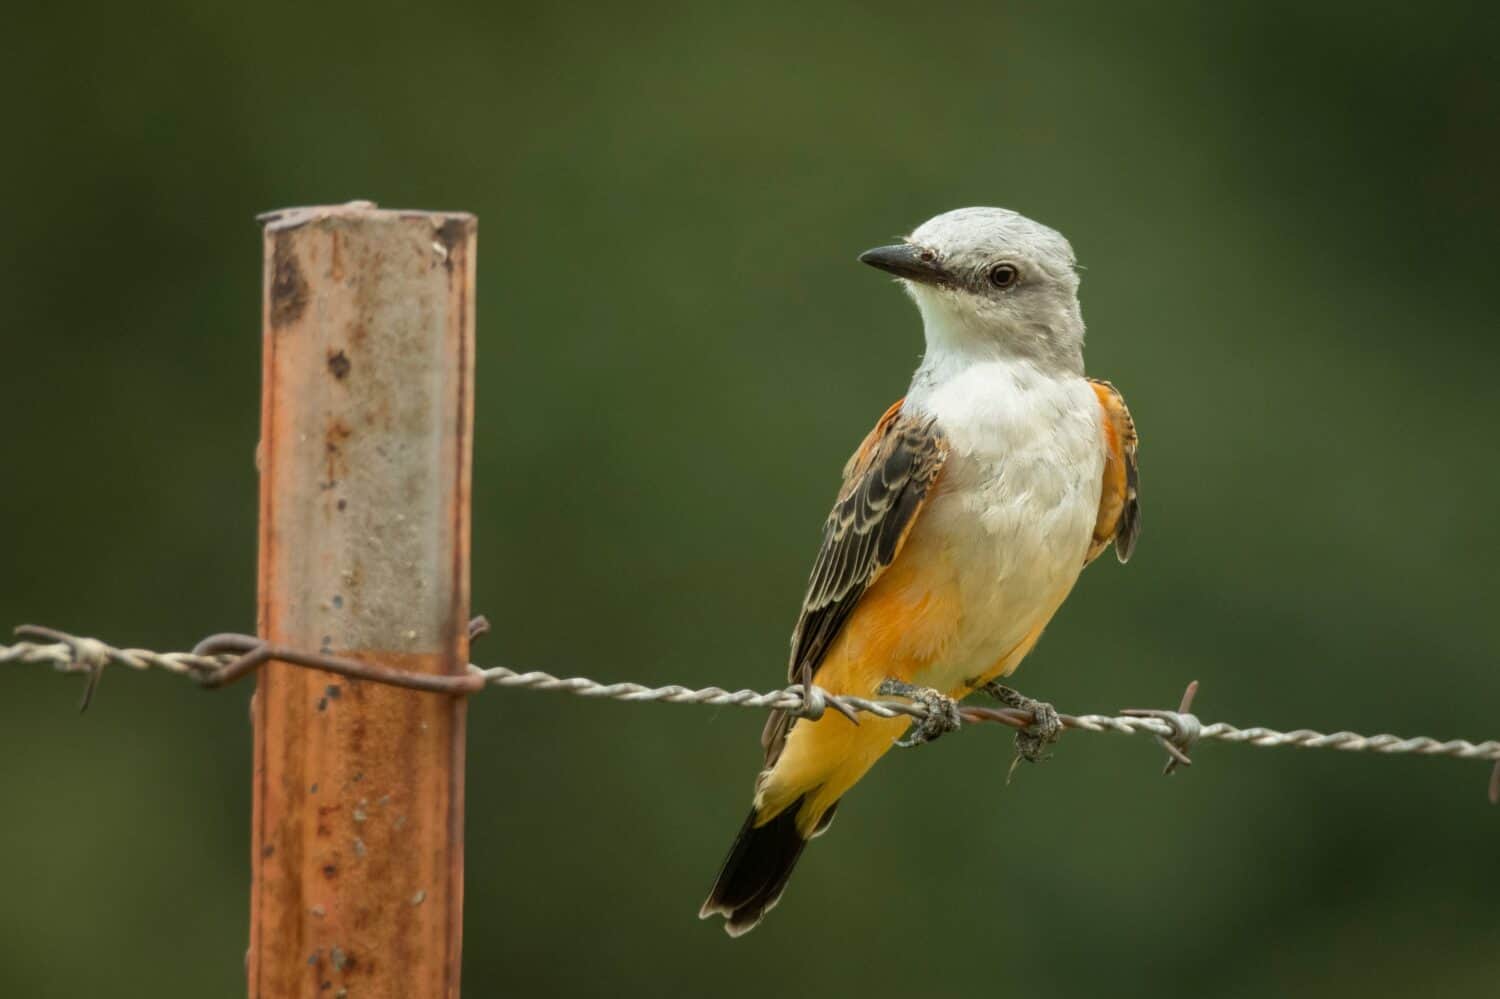 Juvenile Scissor-tailed Flycatcher sitting on a barbwire fence